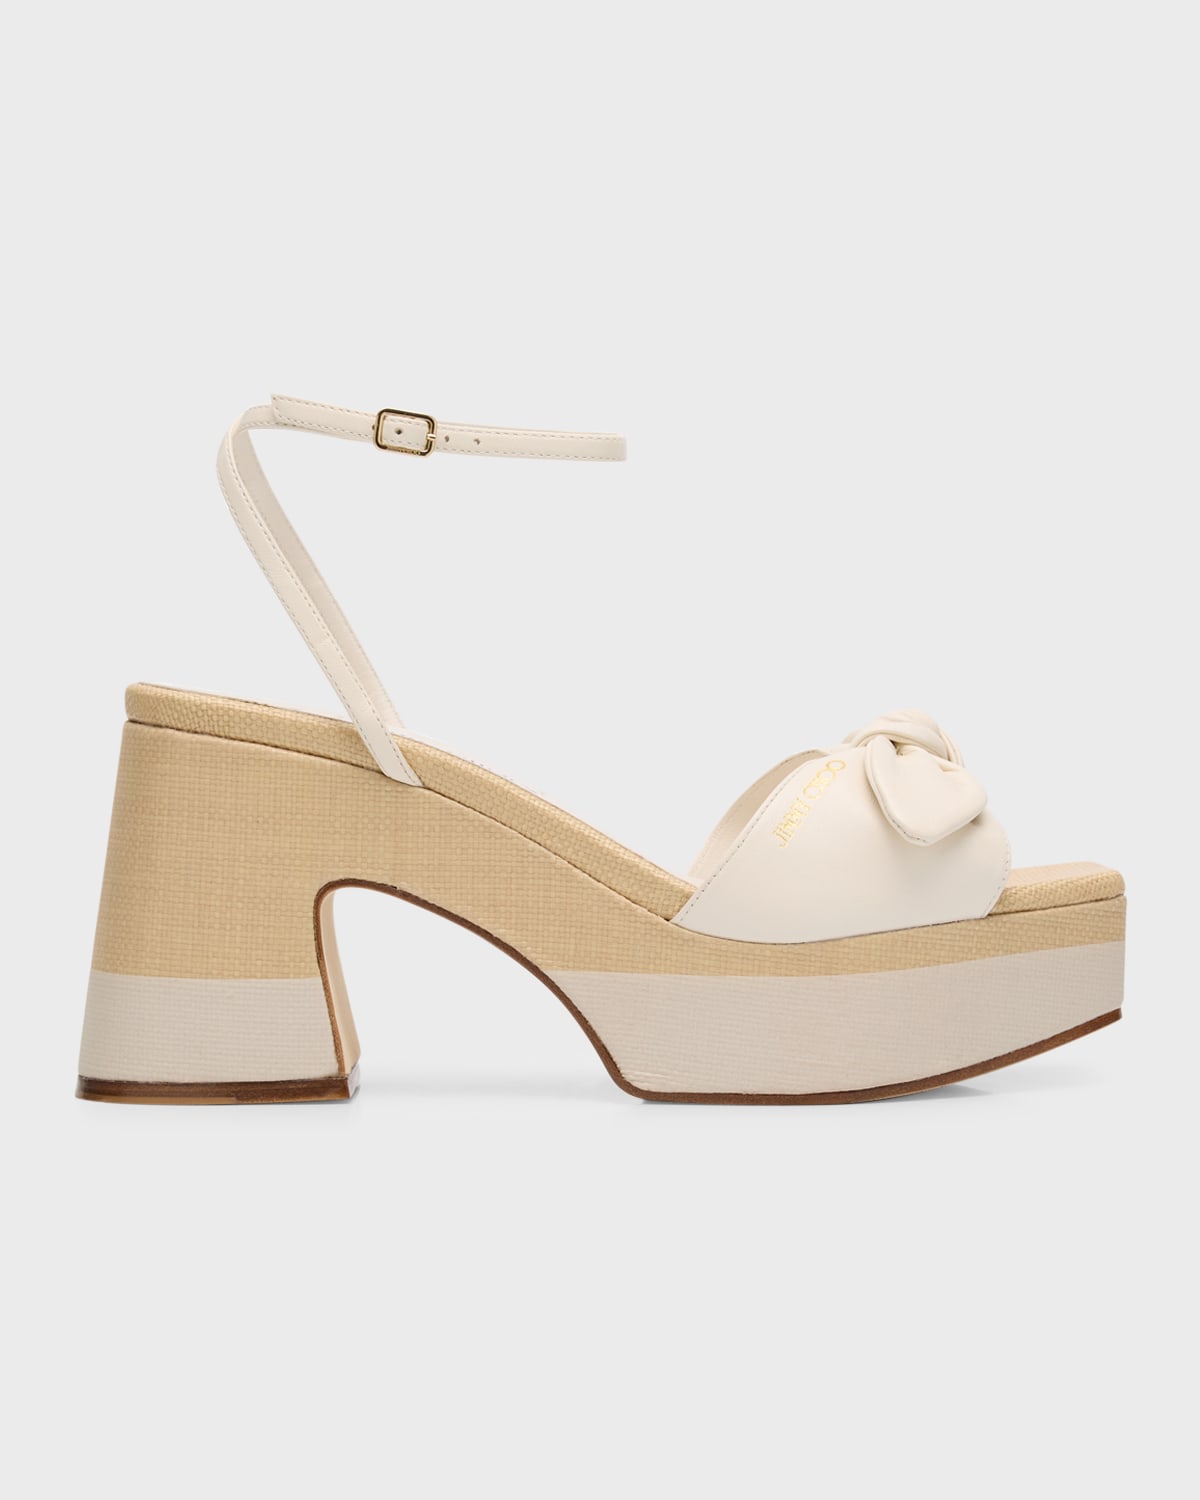 Jimmy Choo Ricia Knotted Bow Platform Sandals In Latte/natural